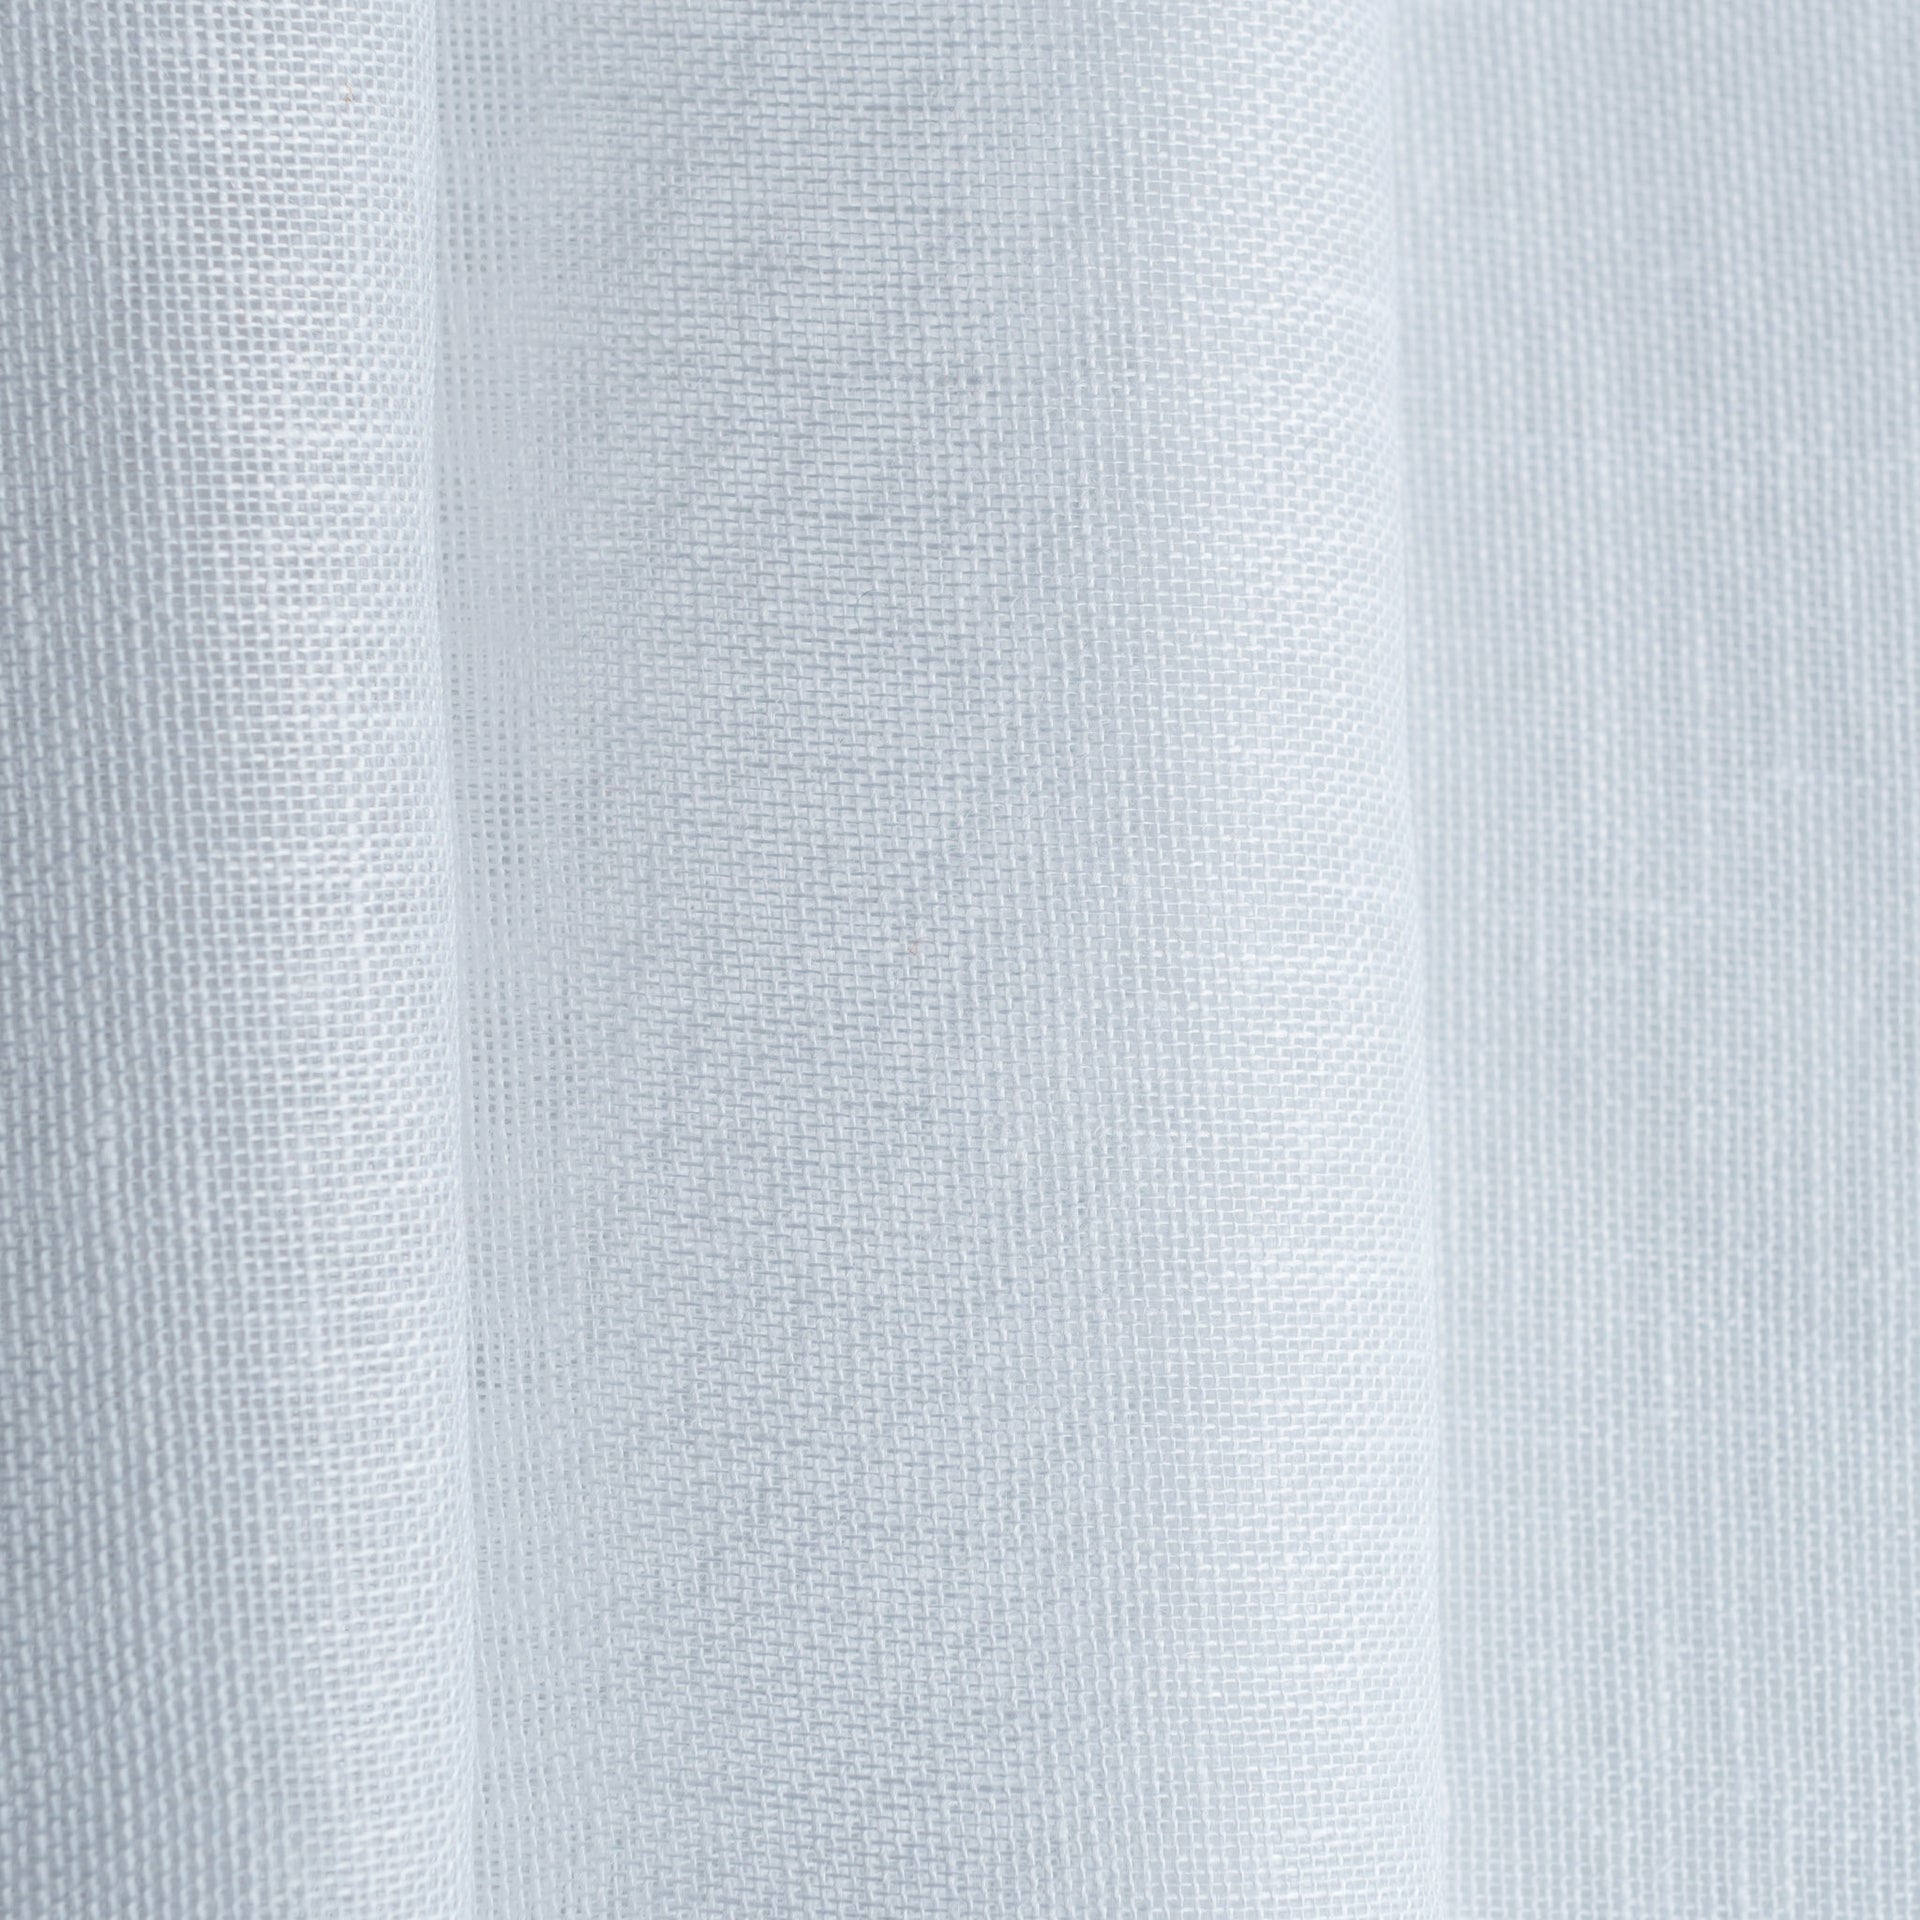 100% Bleached White Linen Fabric